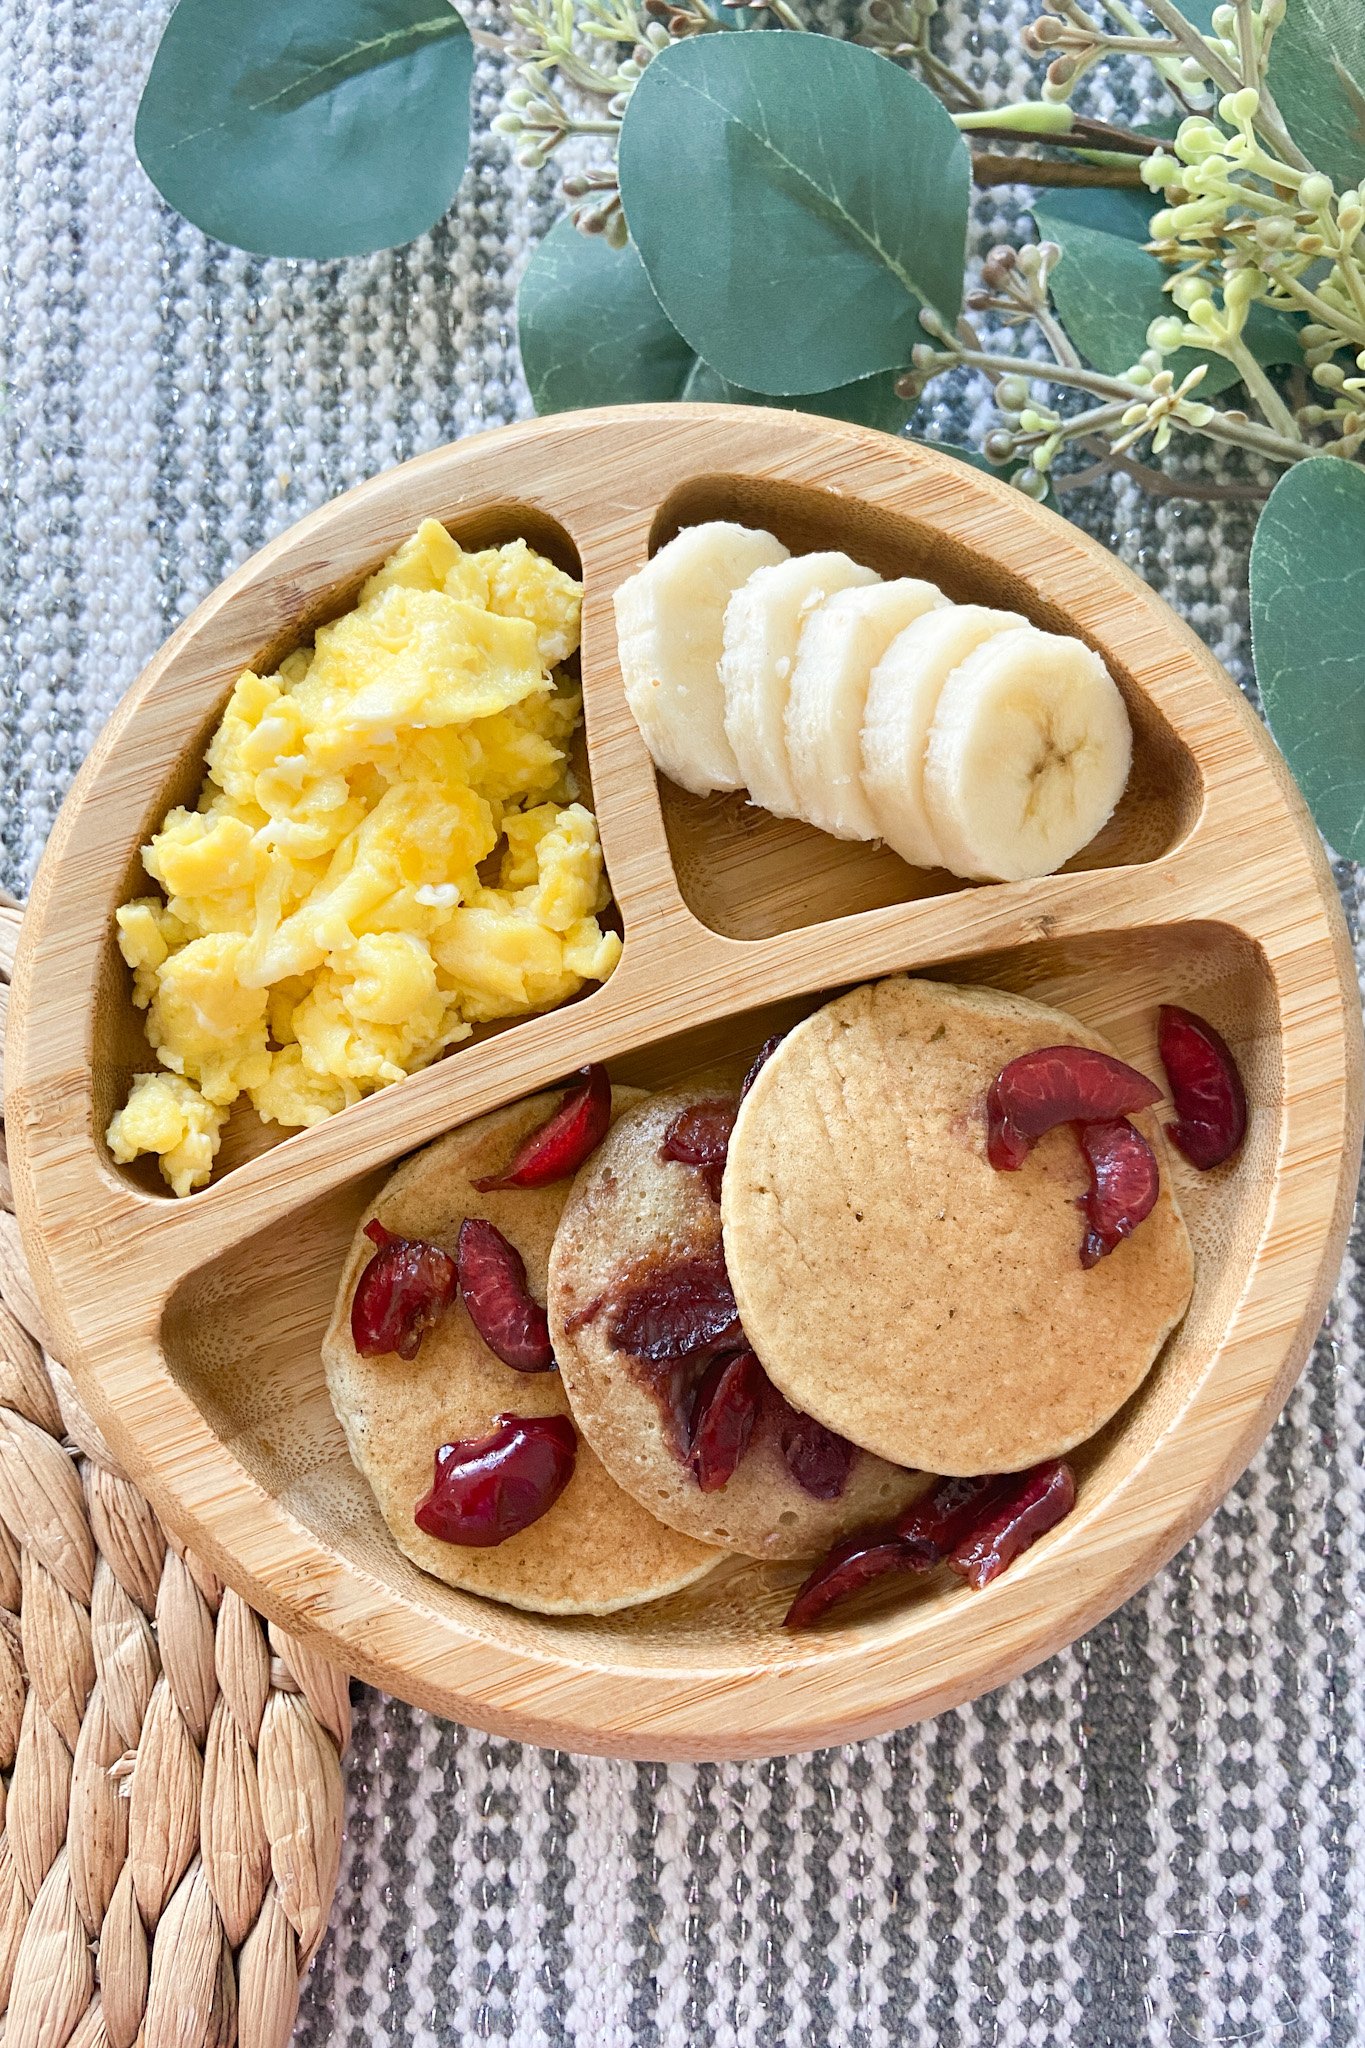 Oatmeal banana pancakes served with cherries, scrambled eggs and sliced bananas.